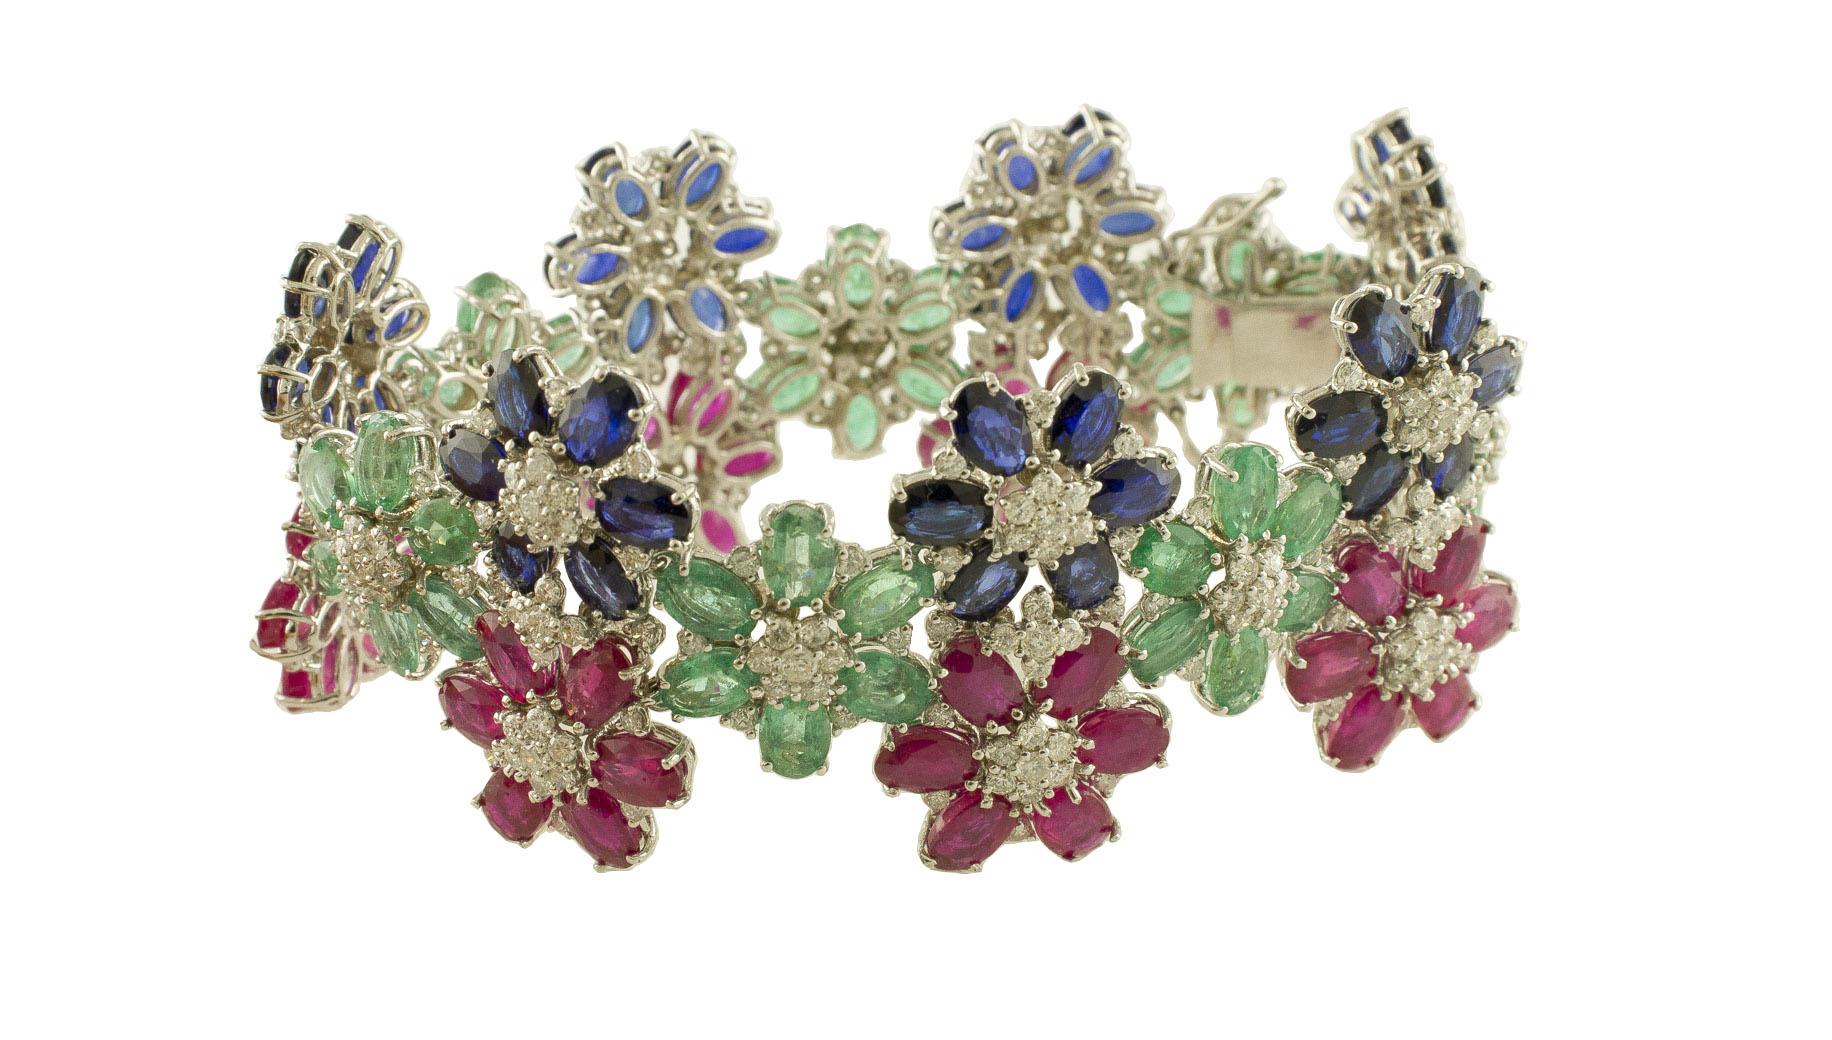 Elegant flower theme link bracelet in 14k white gold composed by rubies, emeralds and blue sapphires petals and little shining white diamonds in the center
Diamonds 8.46 ct 
Rubies, Emeralds, Blue Sapphires 72.71 ct 
Total Weight 50.60 g 
R.F +